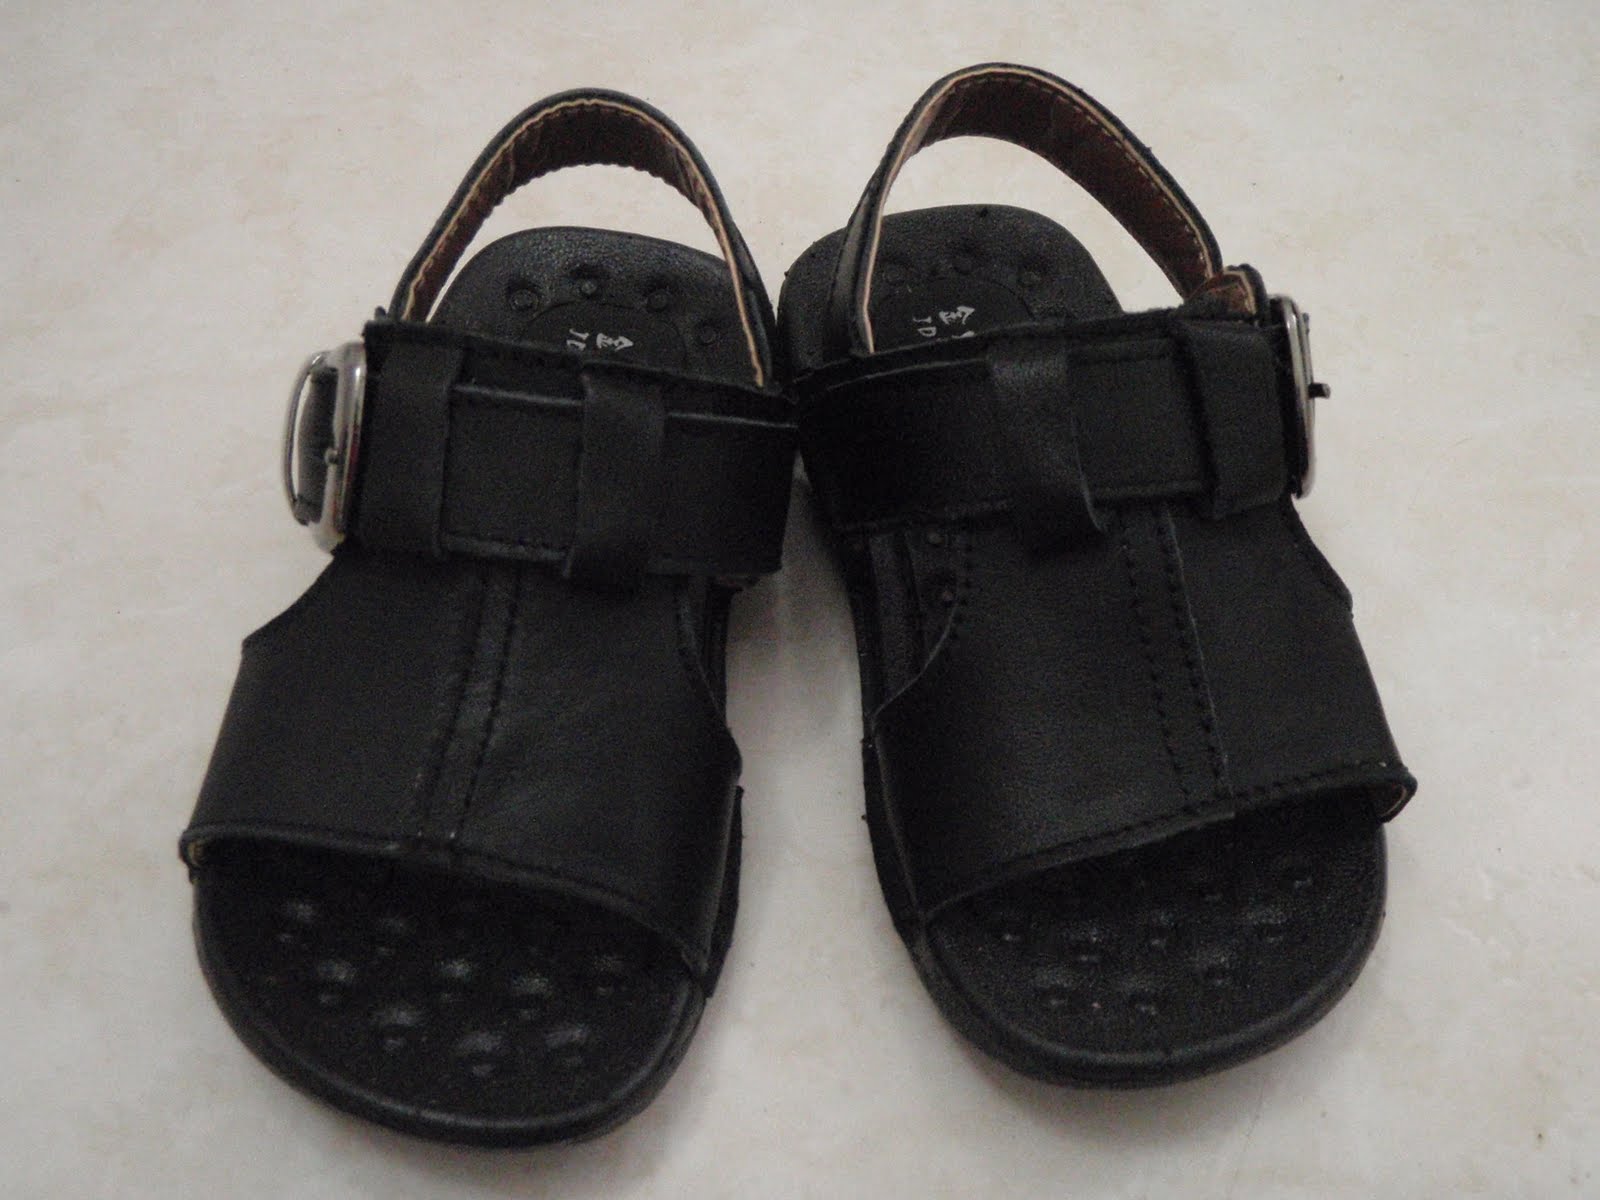 Replica Gucci & LV kids shoes: Kids Shoes for Year 1 - 8